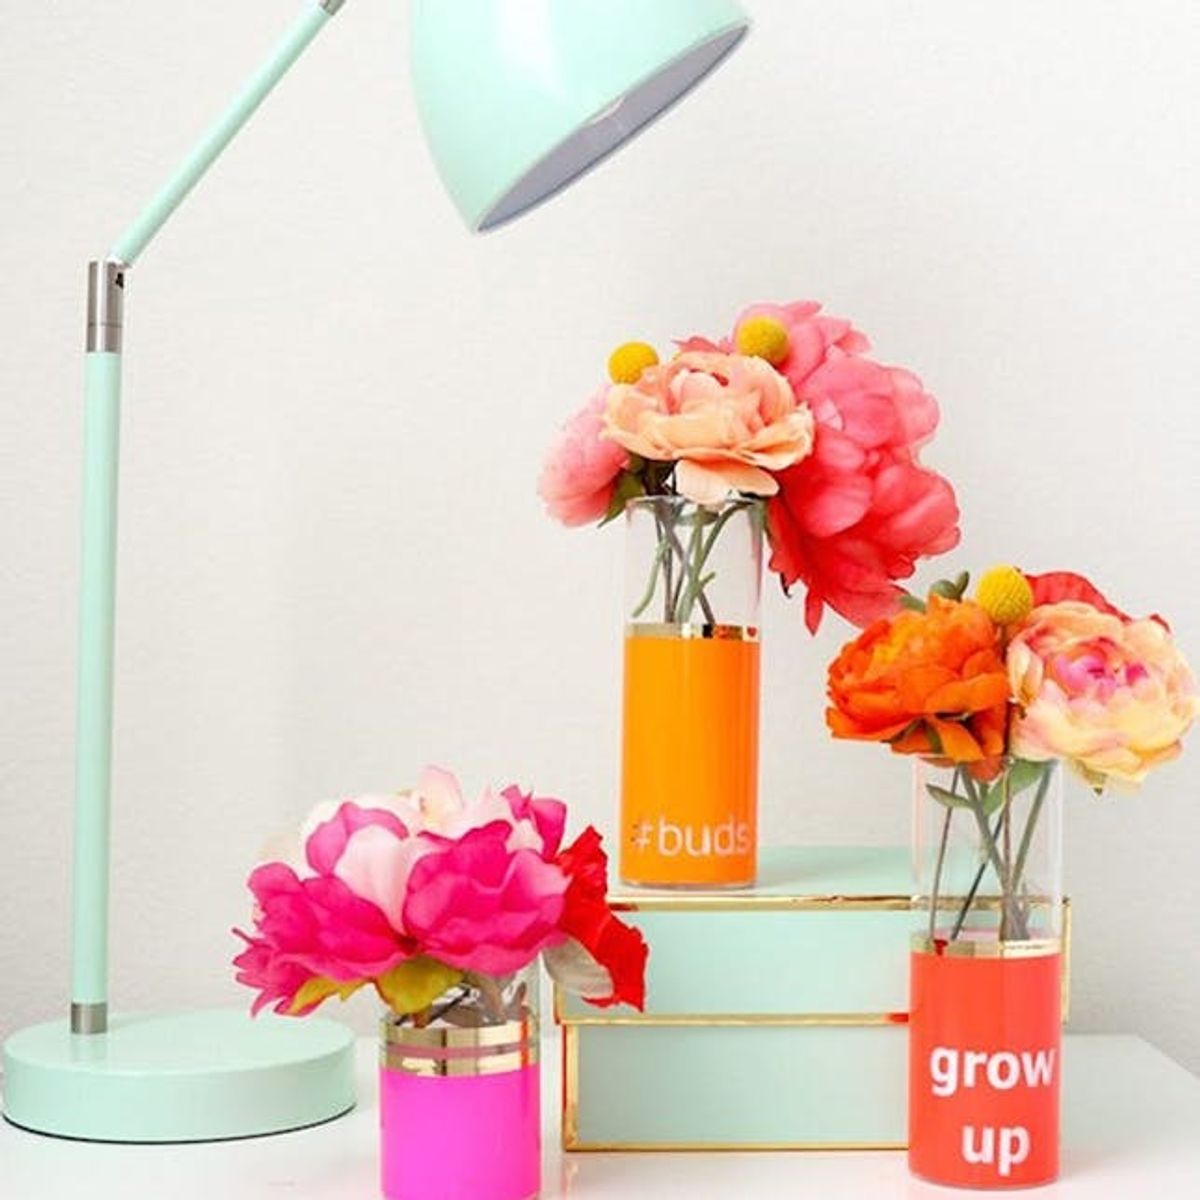 12 Indoor Garden DIYs to Bring New Life to Your Home This Year